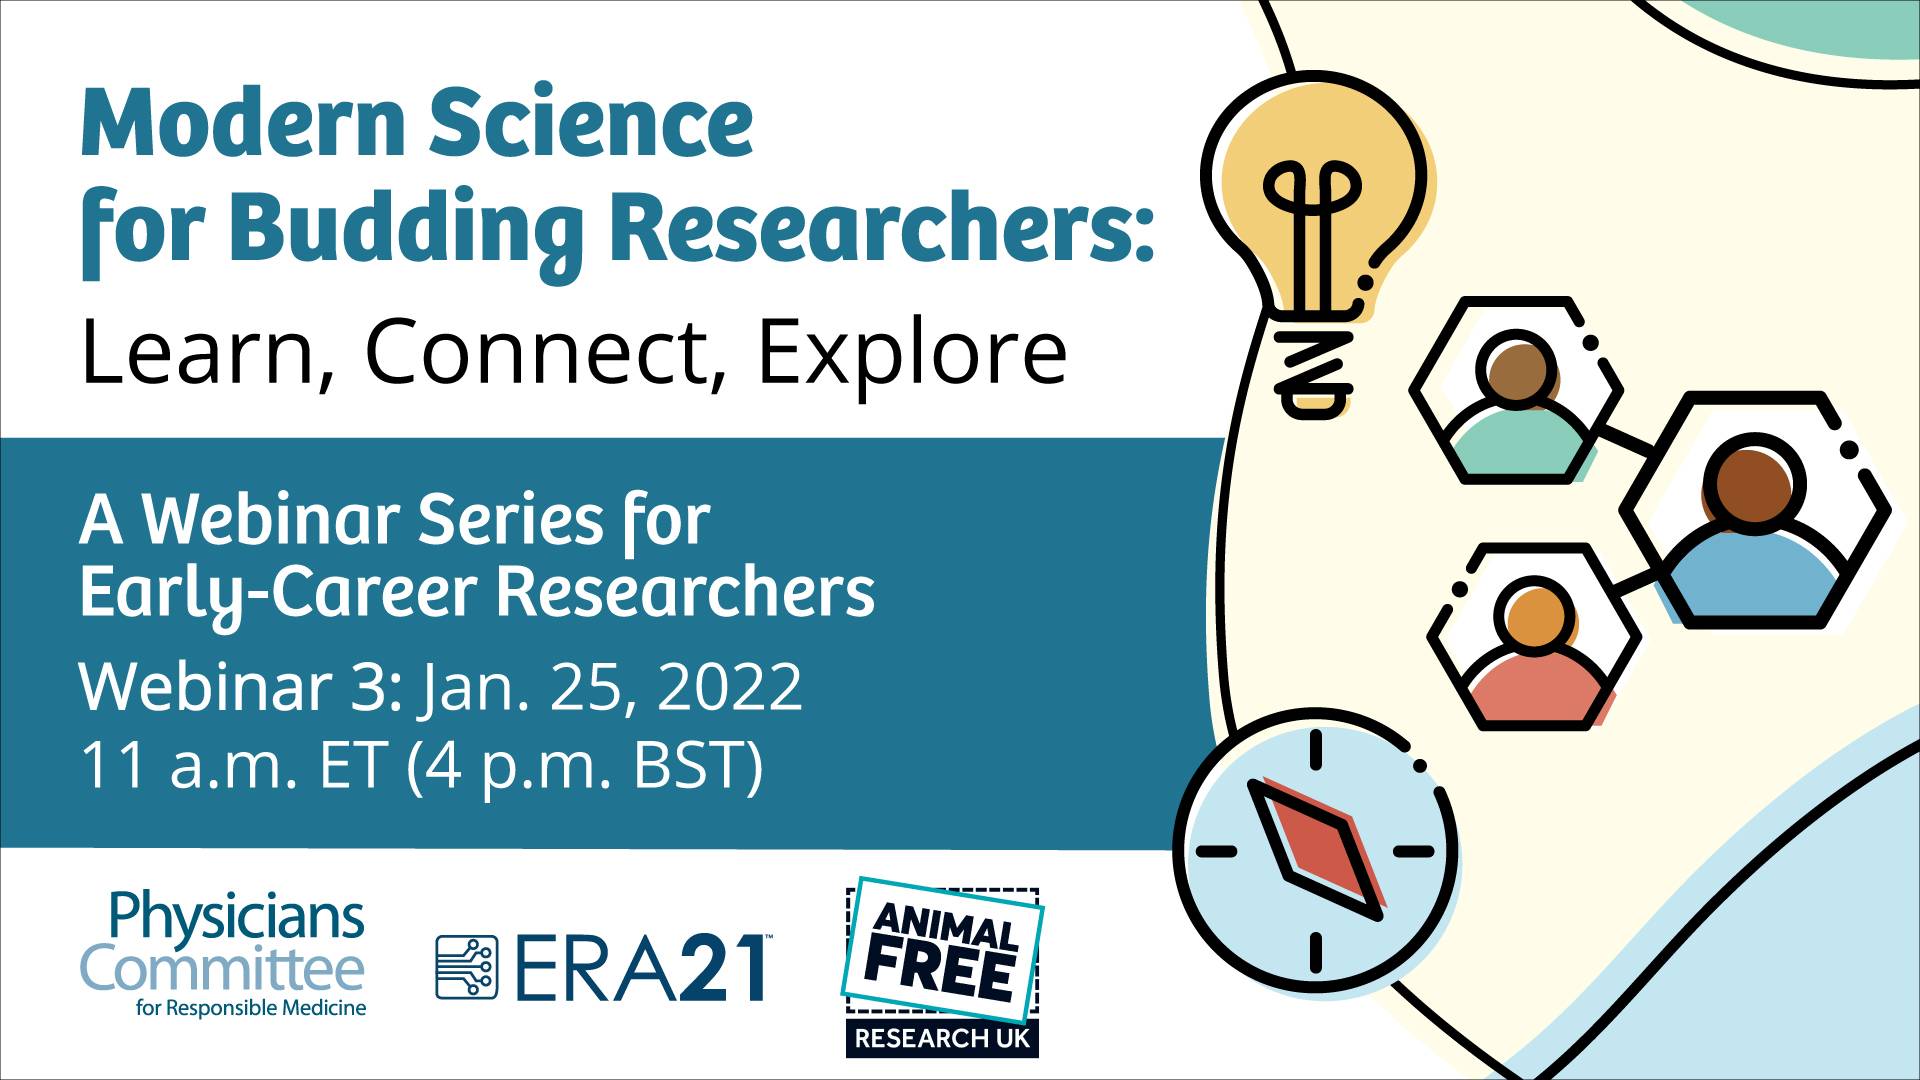 Modern Science for Budding Researchers: A Webinar Series for Early-Career Scientists